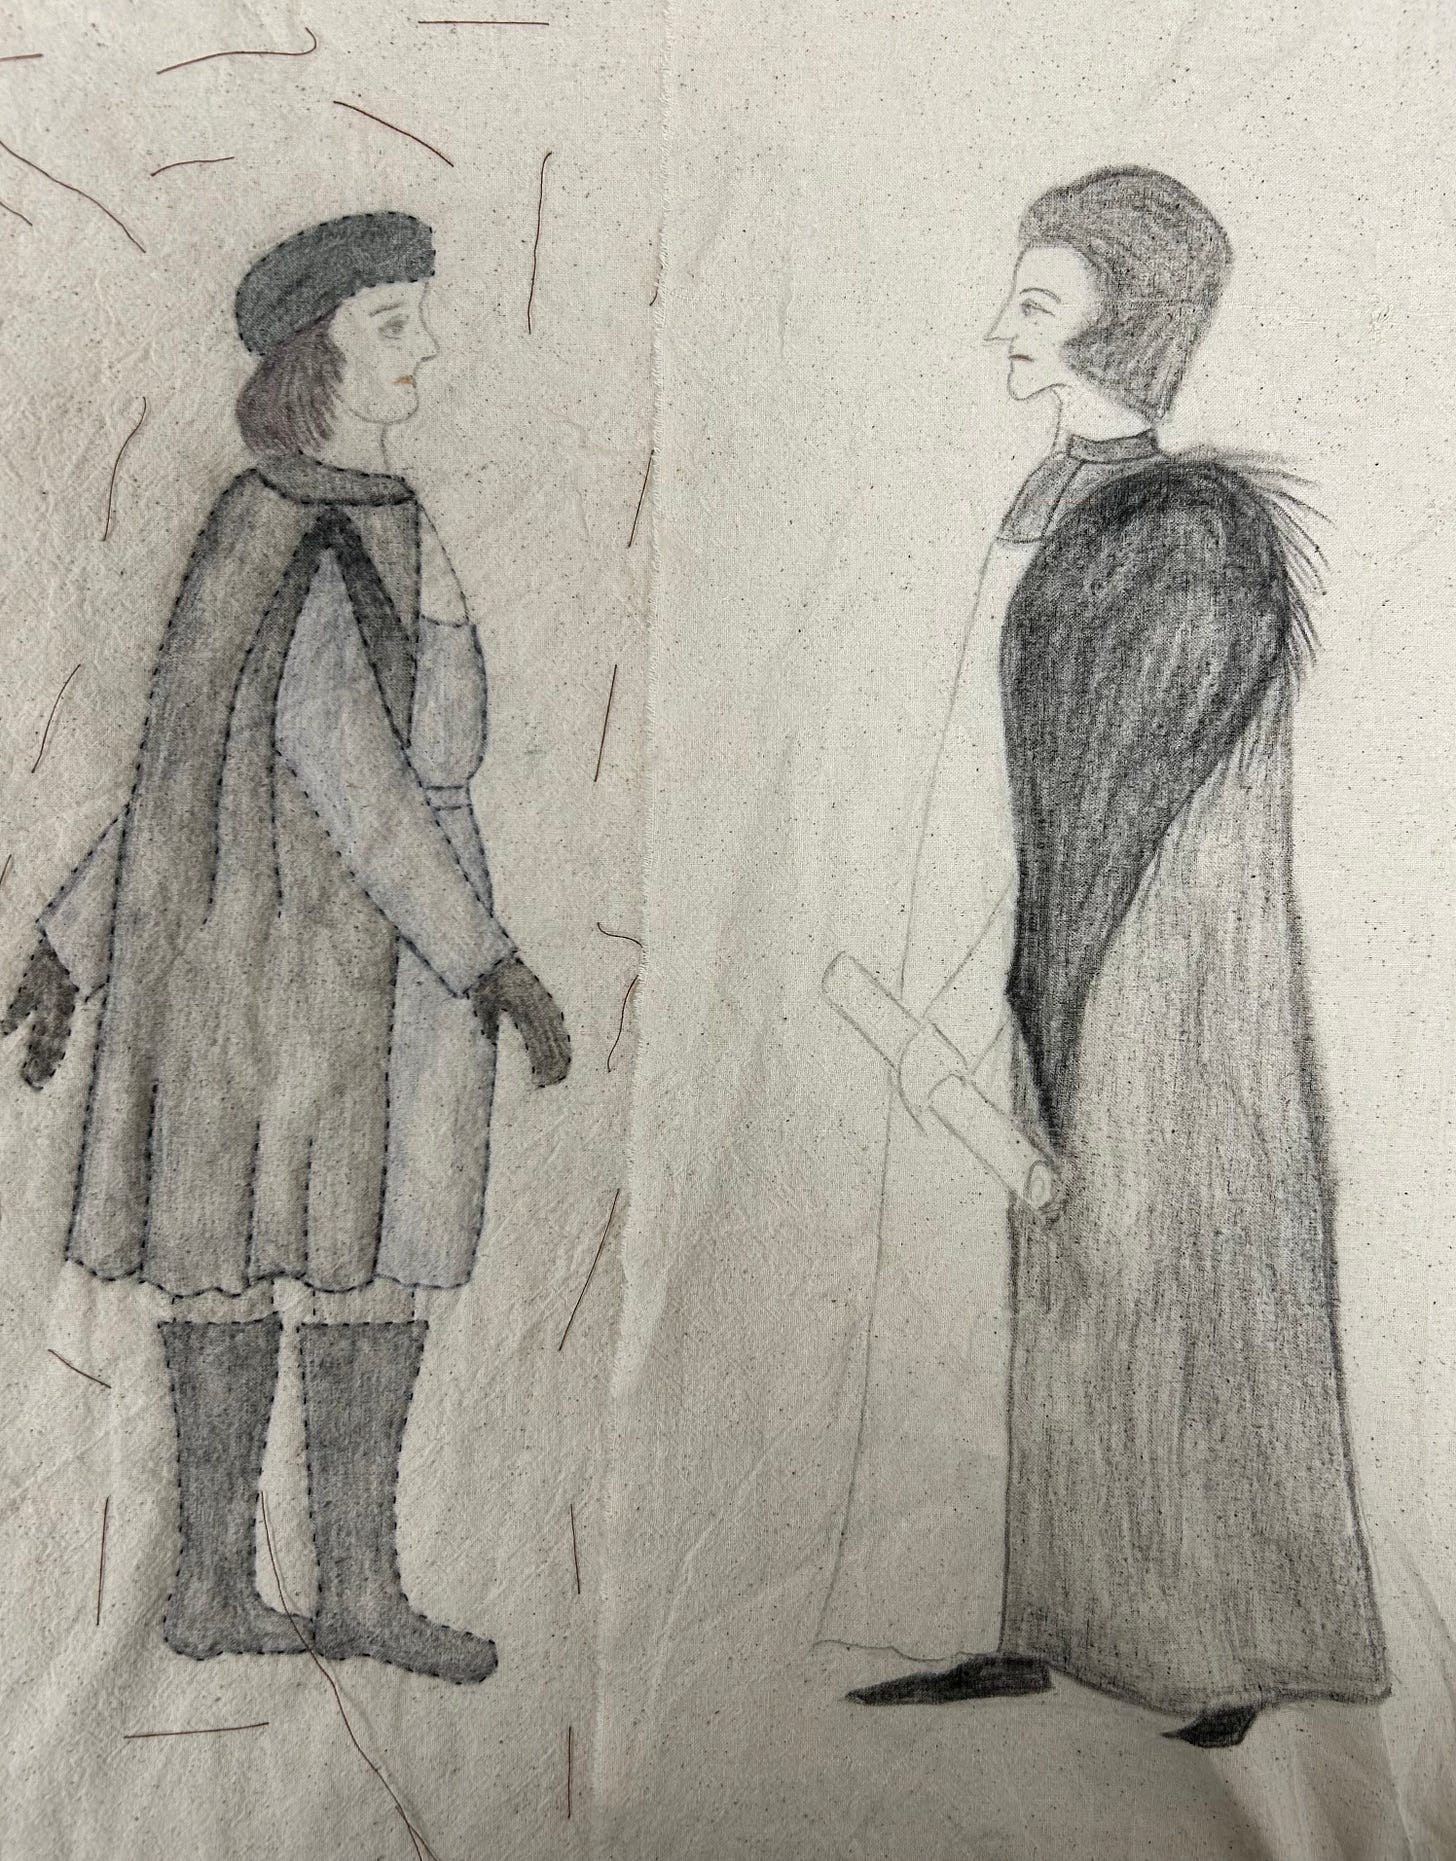 Stitched and painted images of two men in Tudor dress. 